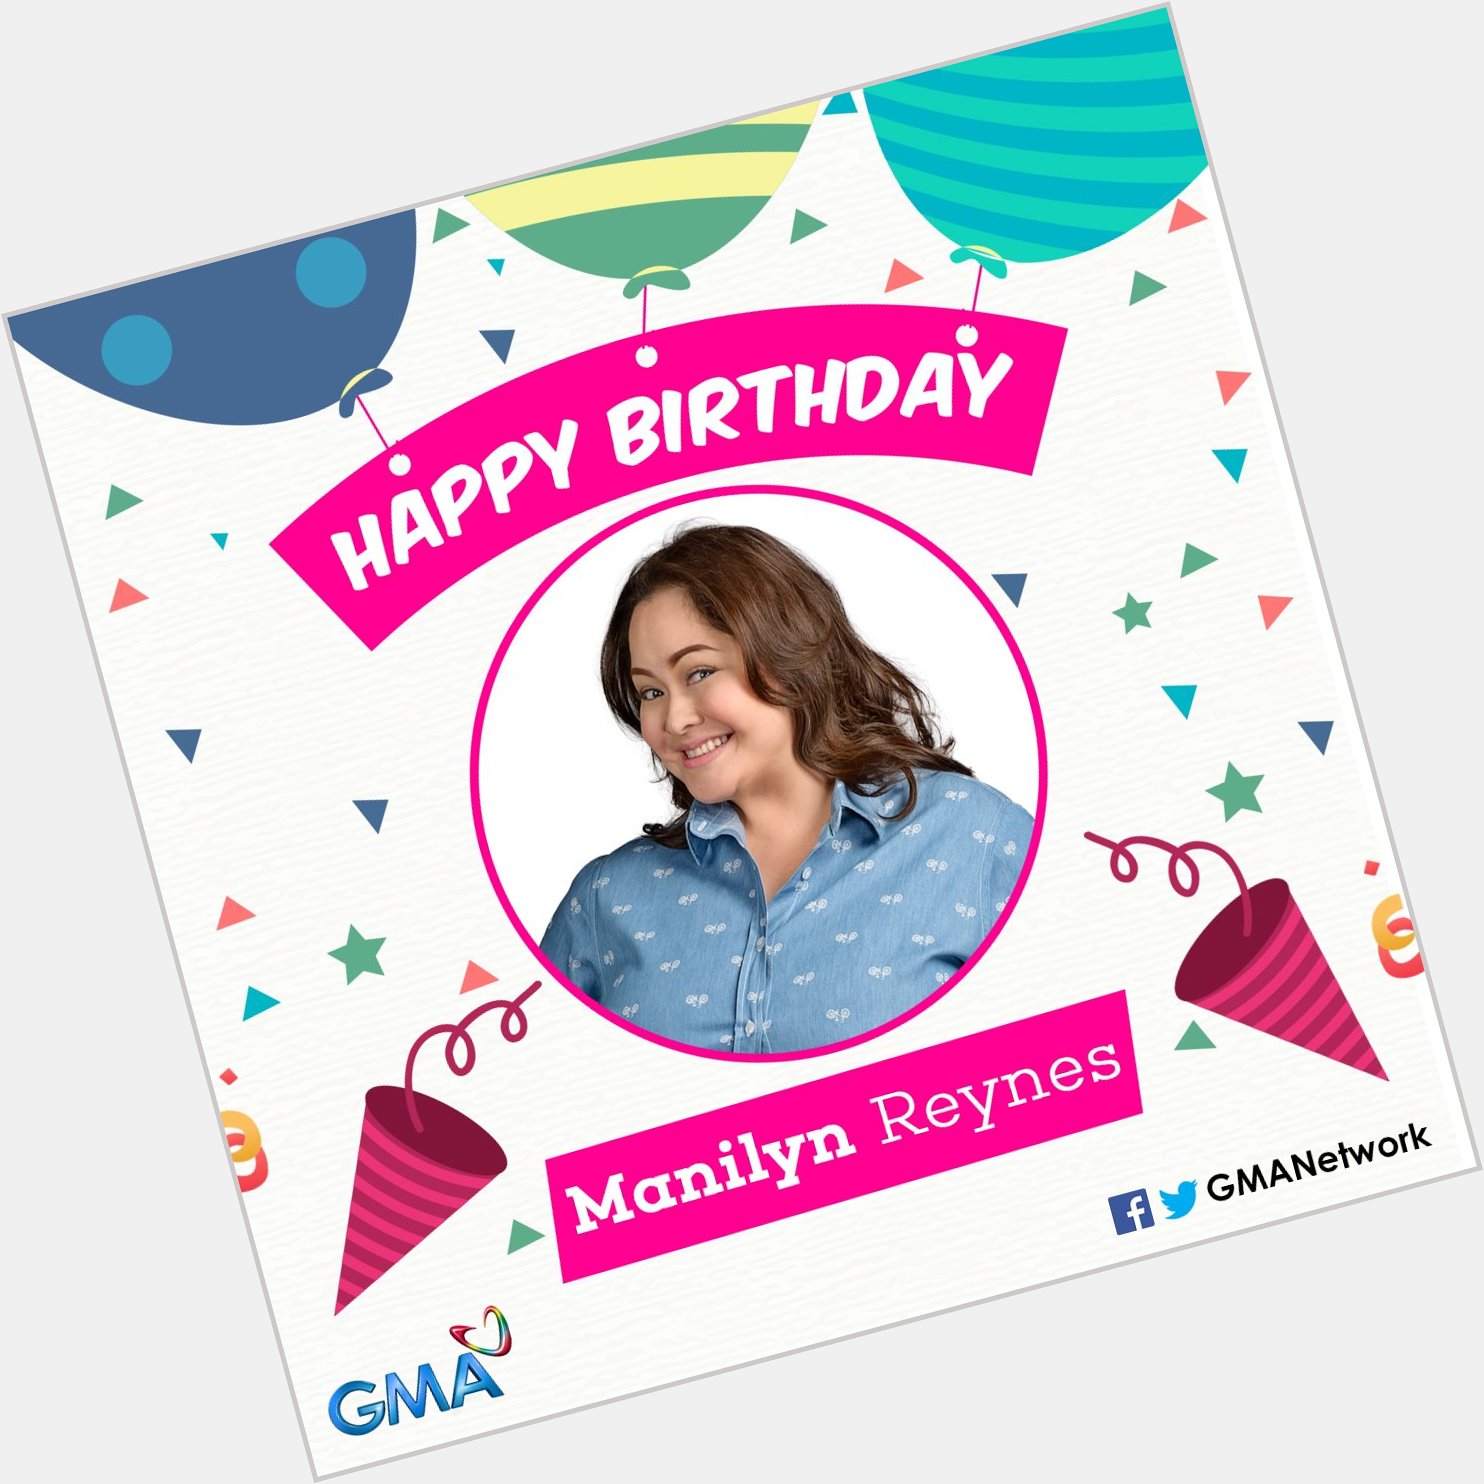 Happy birthday, Manilyn Reynes! 

Wishing you a great year full of love and happiness! 